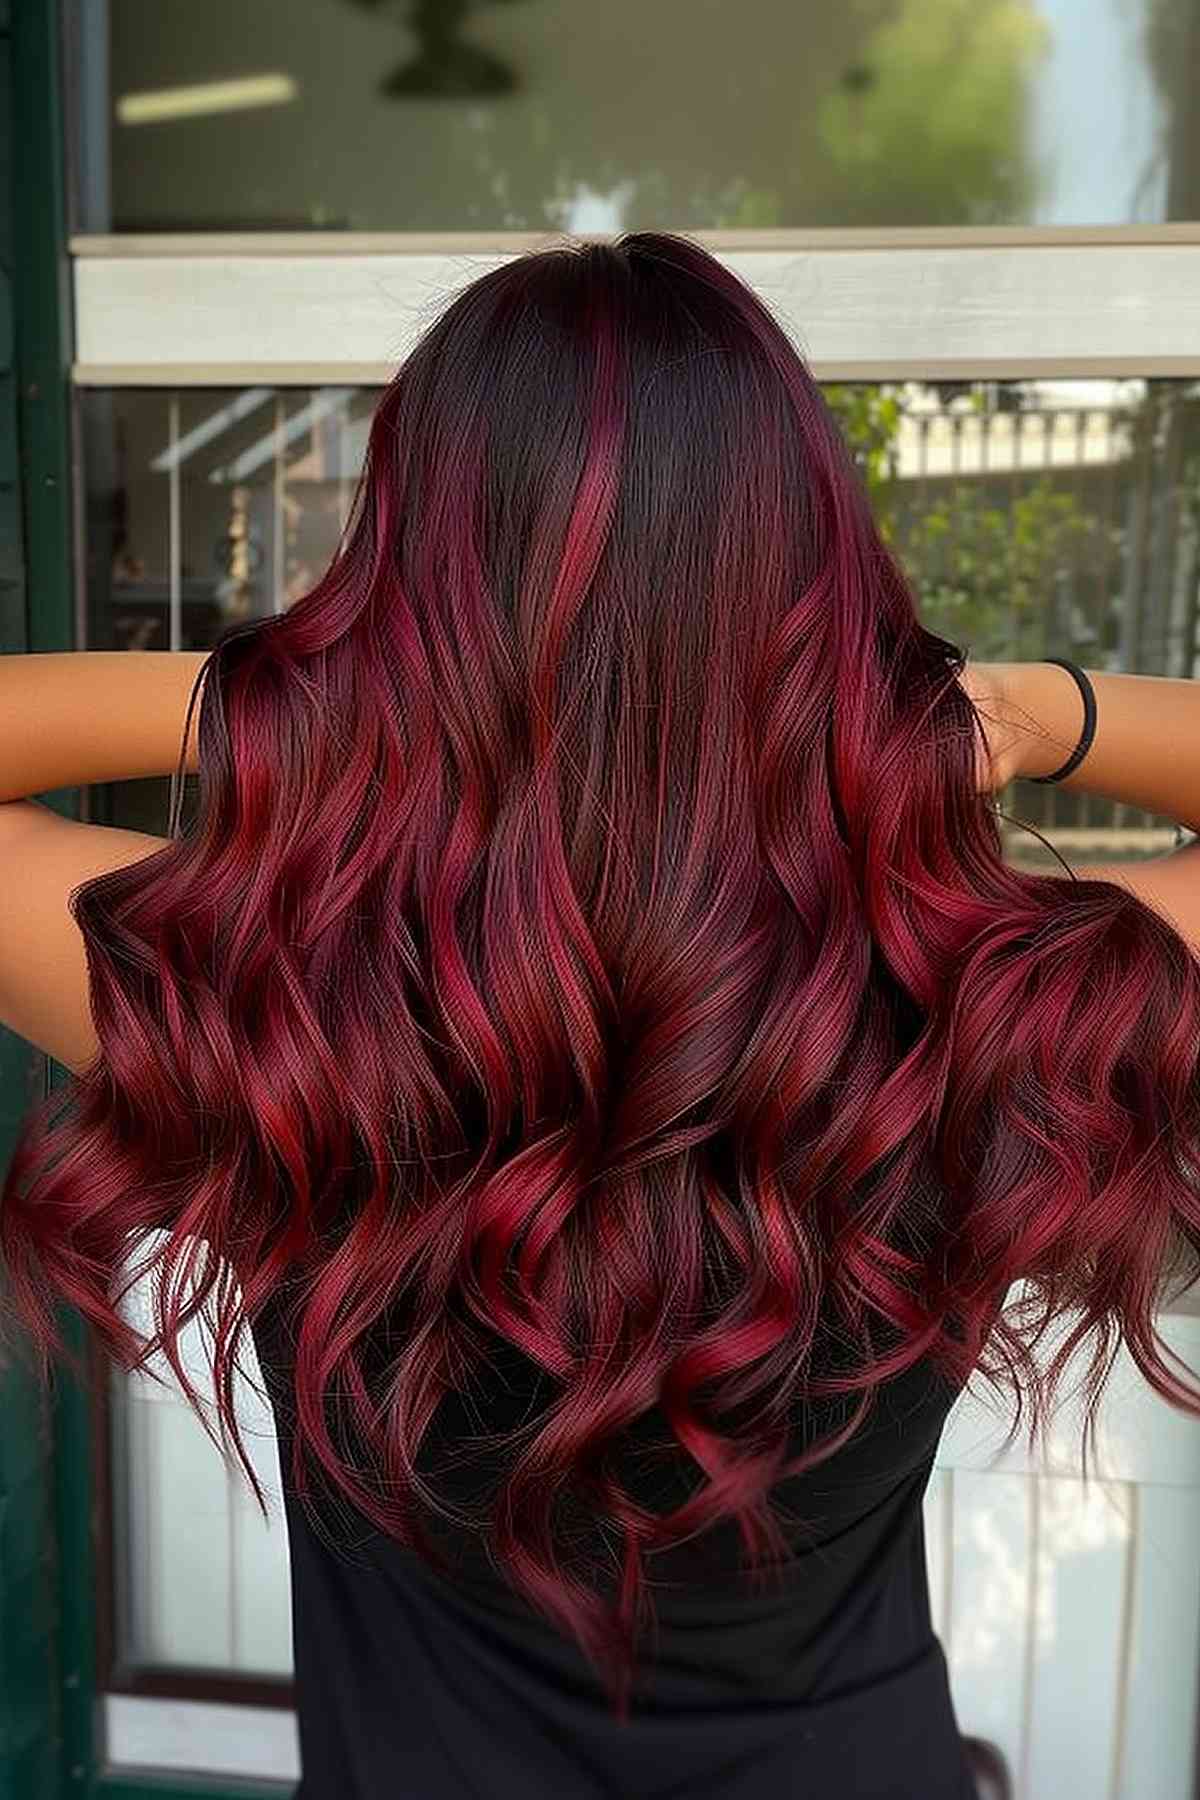 Rich cherry red hair with burgundy tones, enhancing thick, wavy hair texture.